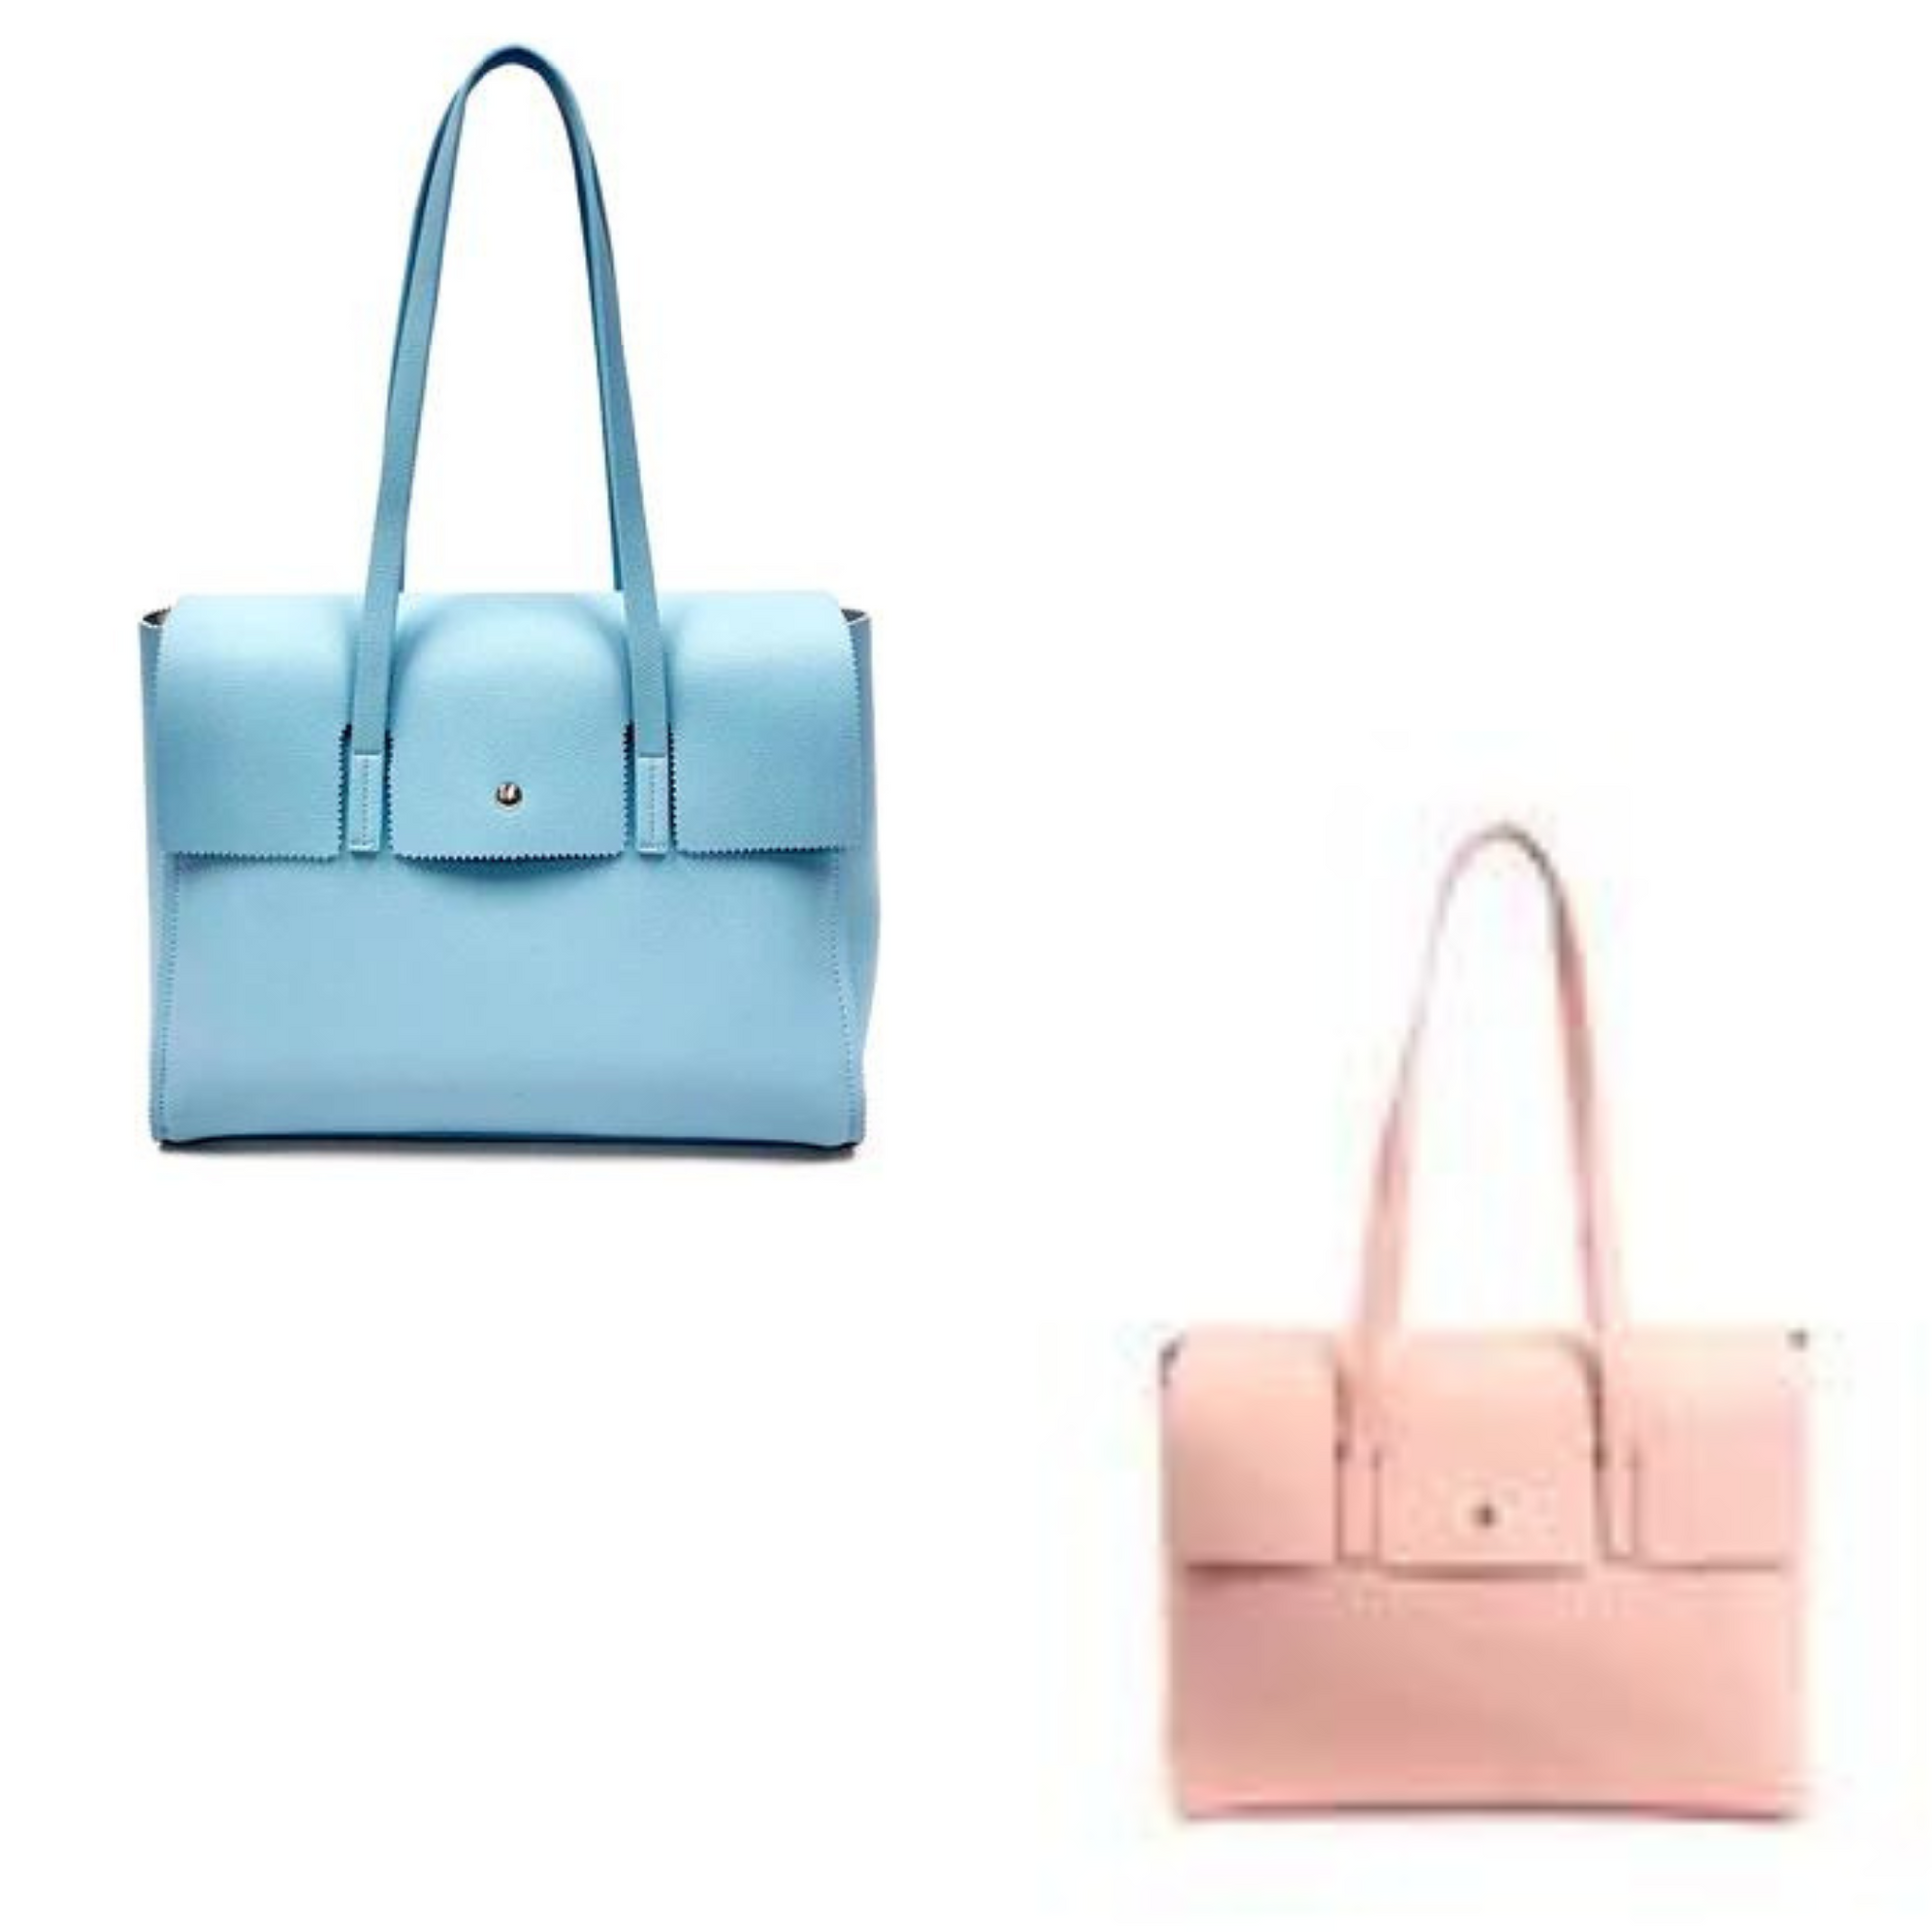 This attractive everyday tote gives you two colors to choose from: pink and blue. The gingham lining adds a stylish touch, making it perfect for any occasion. With plenty of room, it's a practical and fashionable way to go.